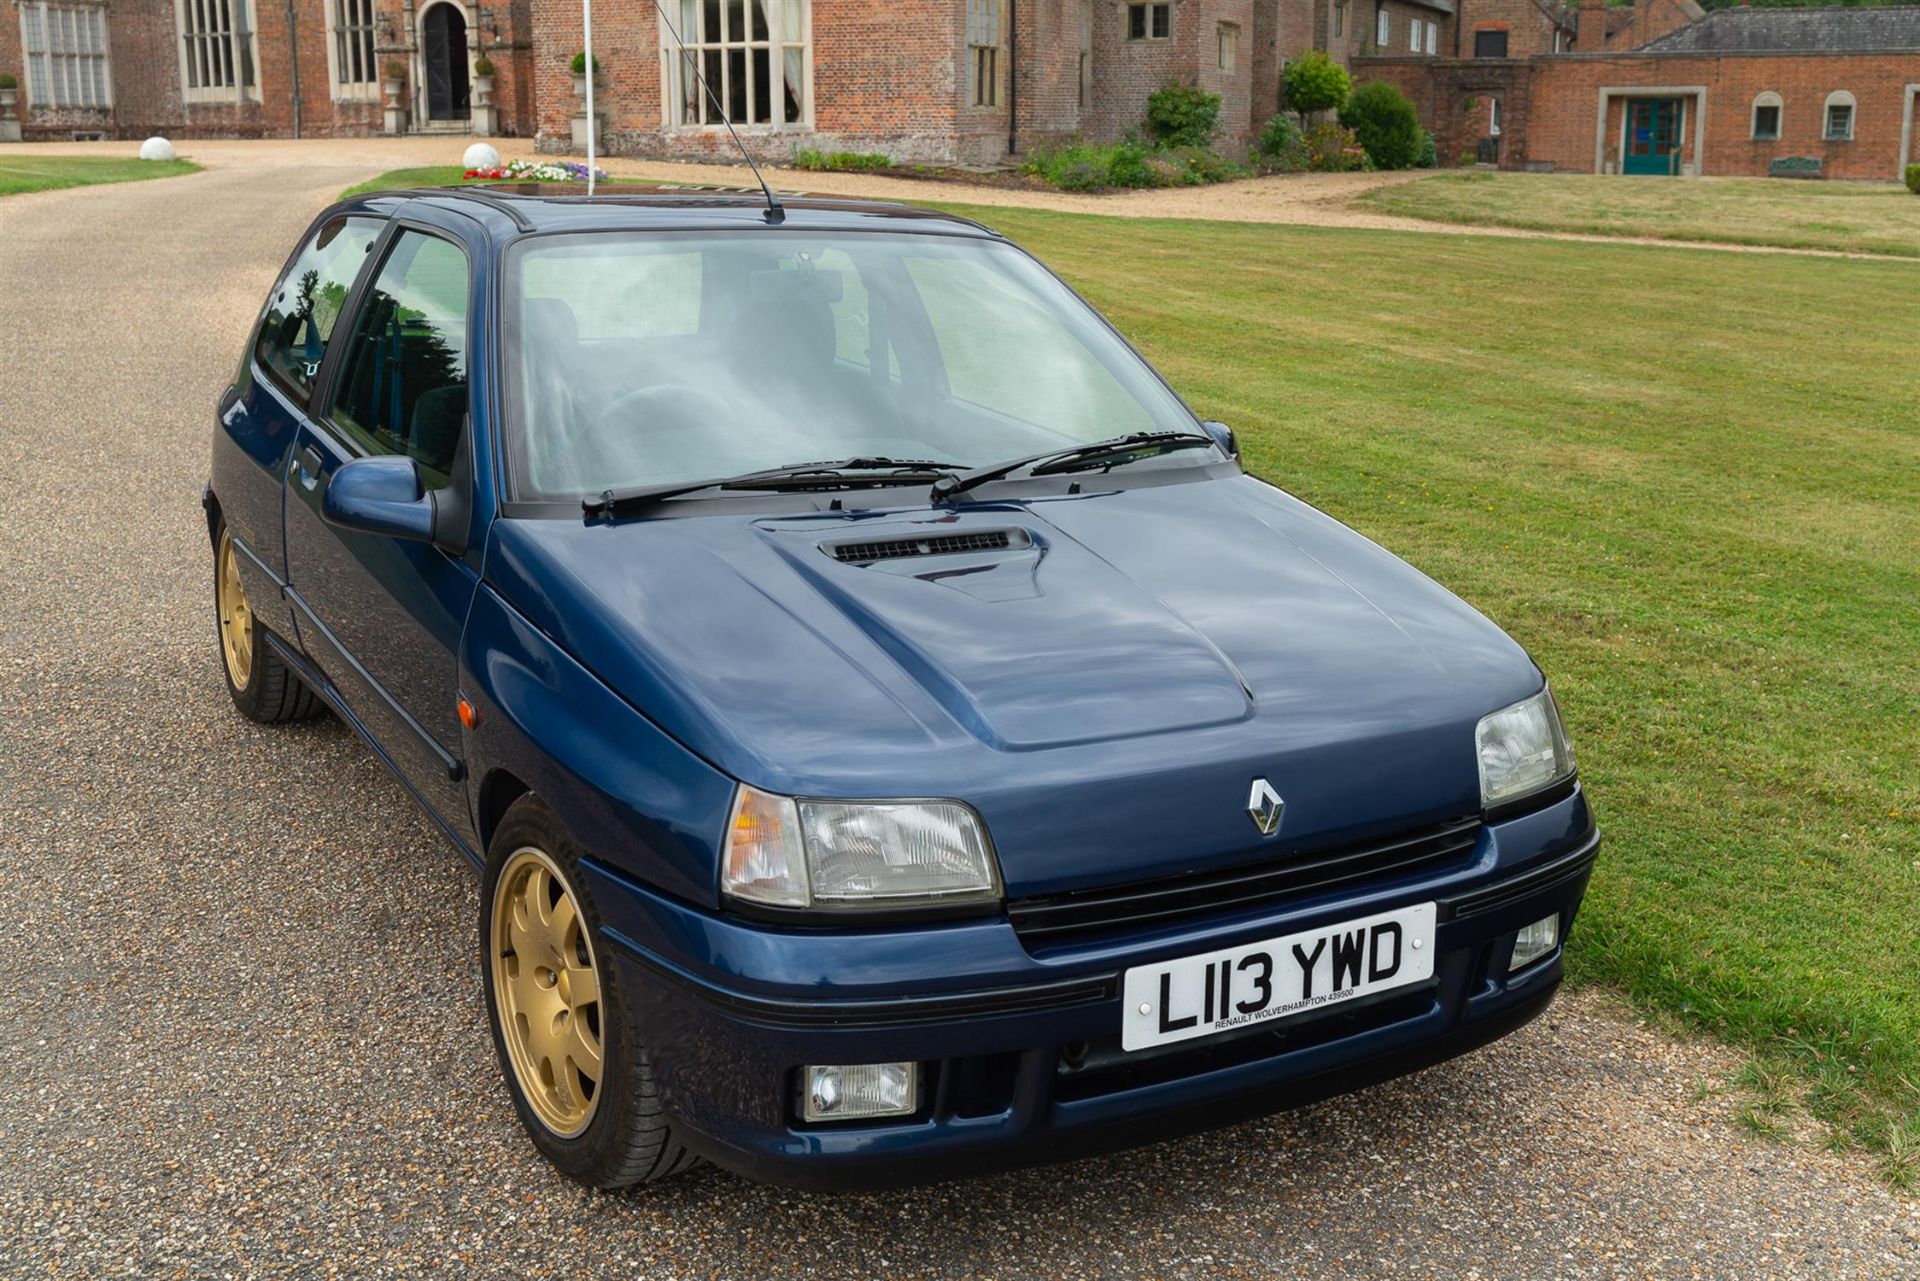 1994 Renault Clio Williams 1 (Phase One) #337 - Image 6 of 10